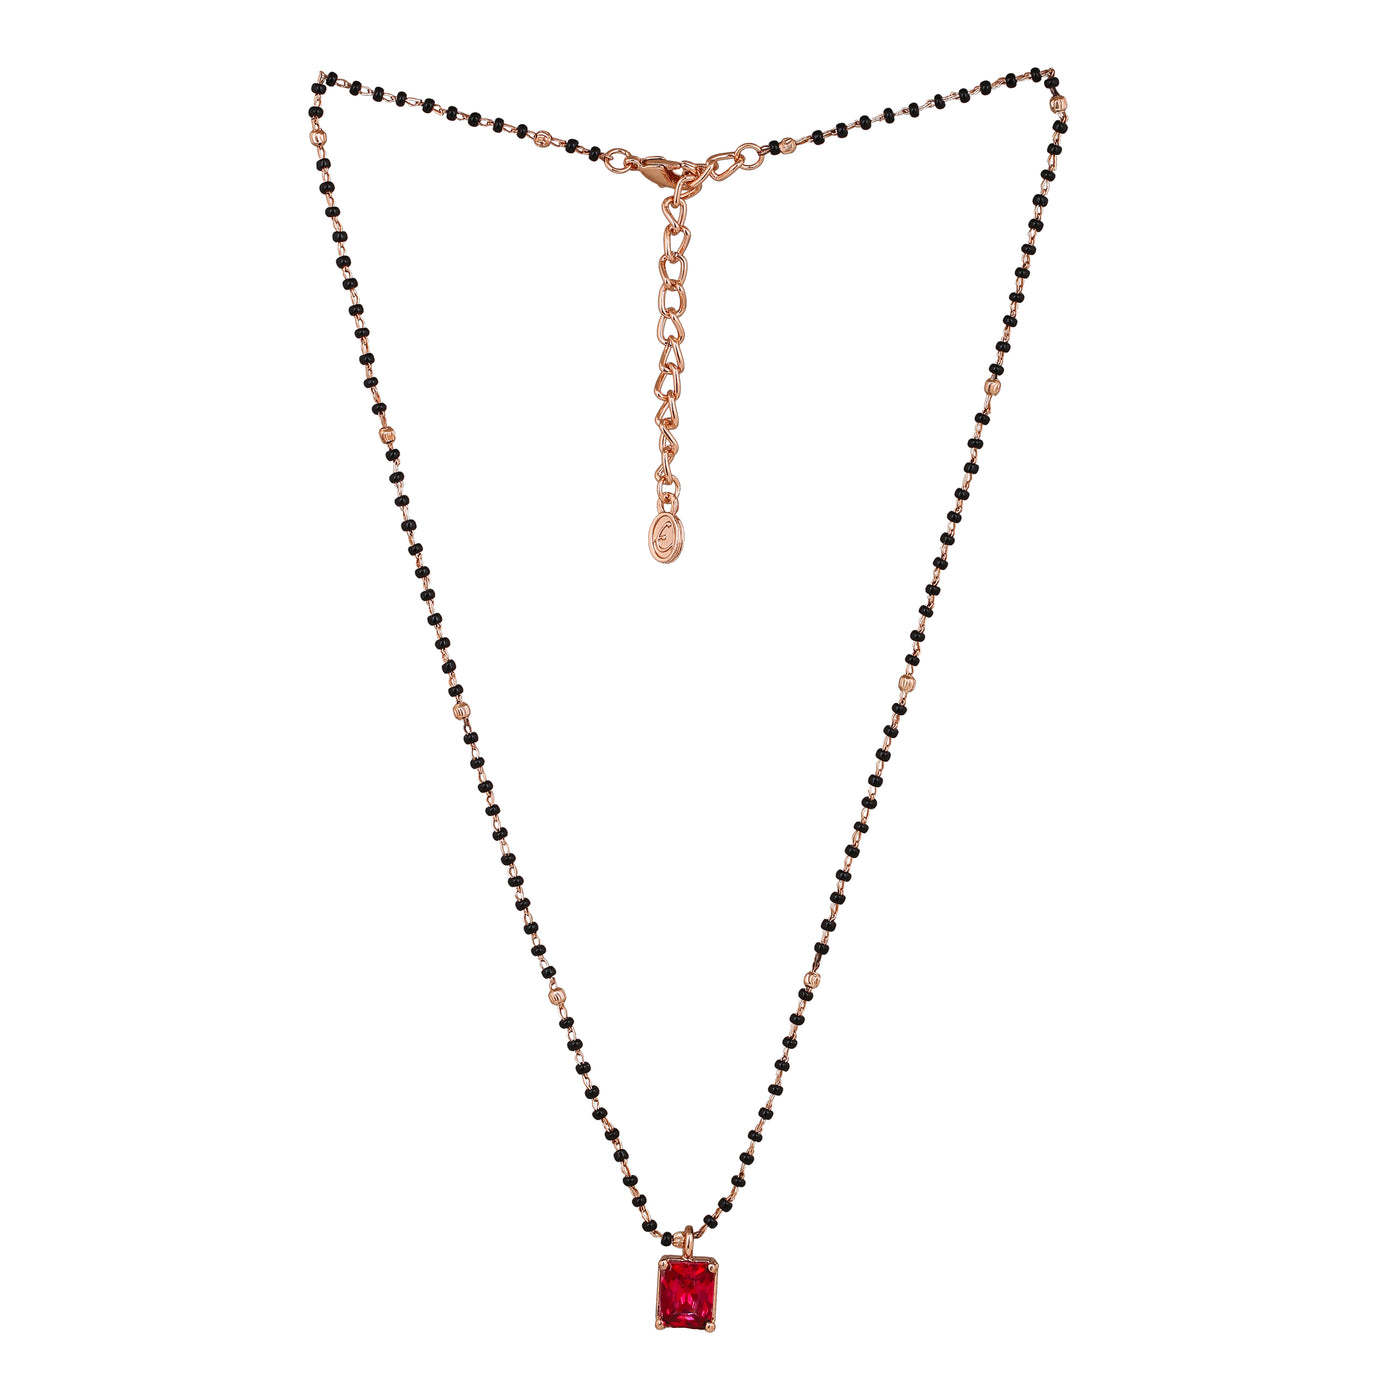 Estele Rose Gold Plated CZ Square Designer Mangalsutra Necklace Set with Ruby Stones for Women